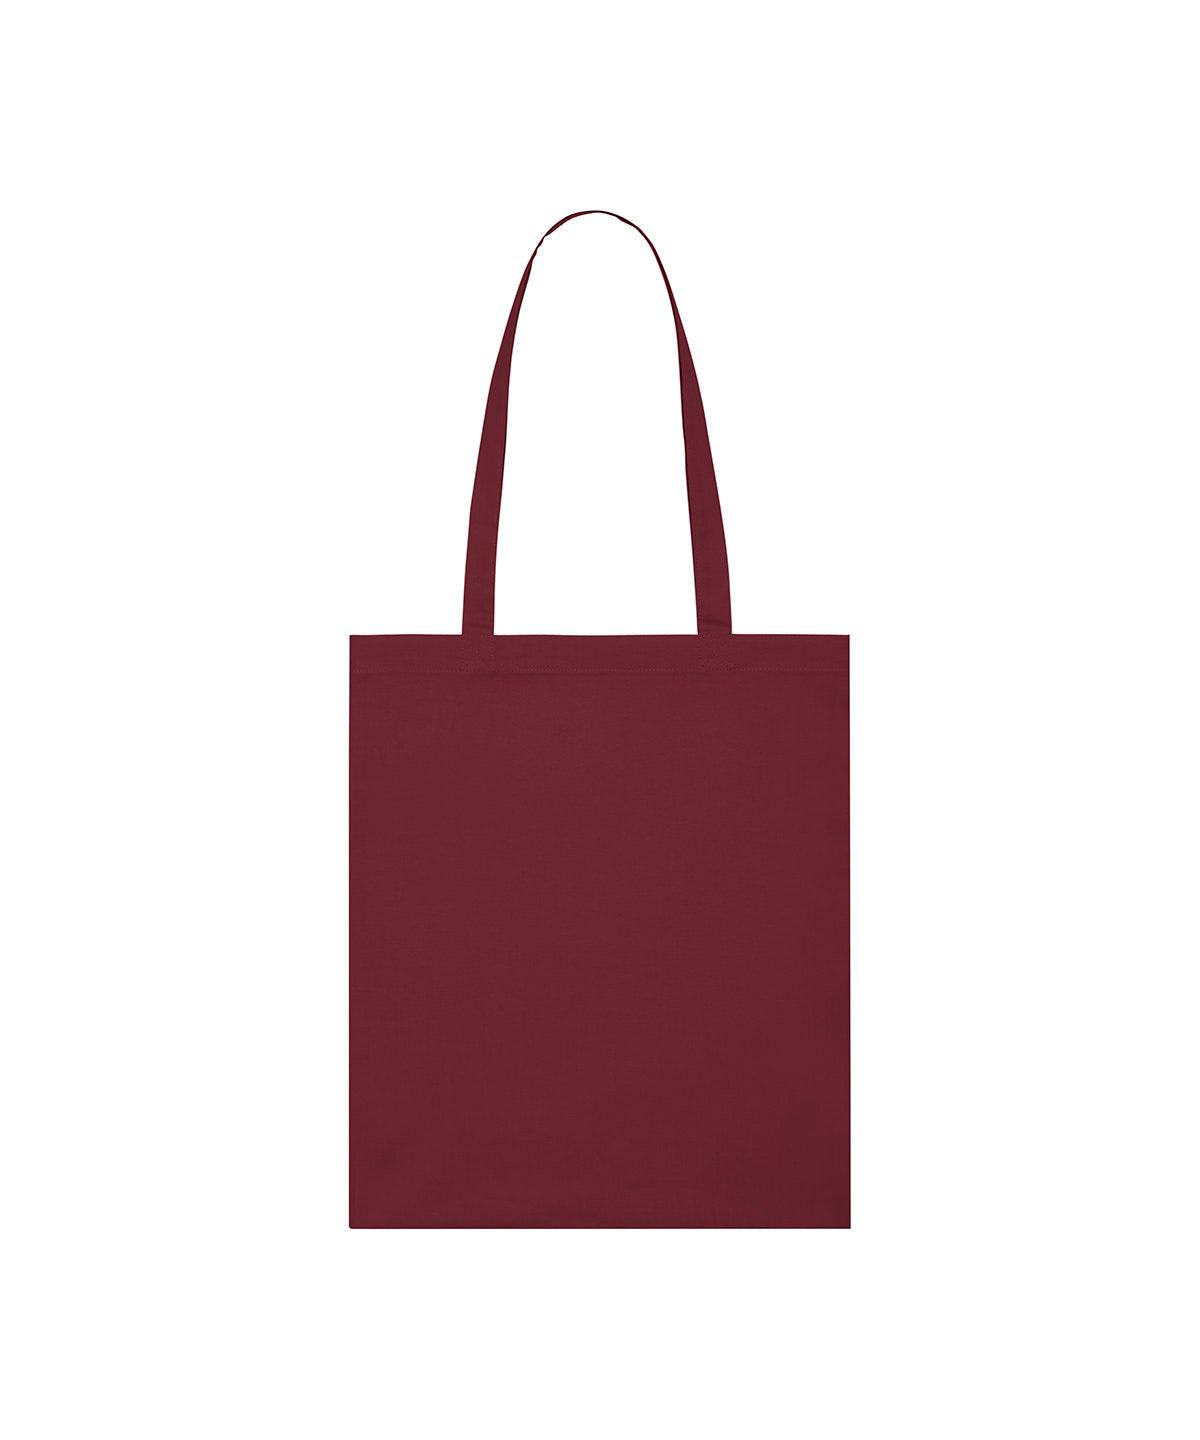 Burgundy - Light tote bag (STAU773) Bags Stanley/Stella Bags & Luggage, Exclusives, New Styles For 2022, Organic & Conscious Schoolwear Centres